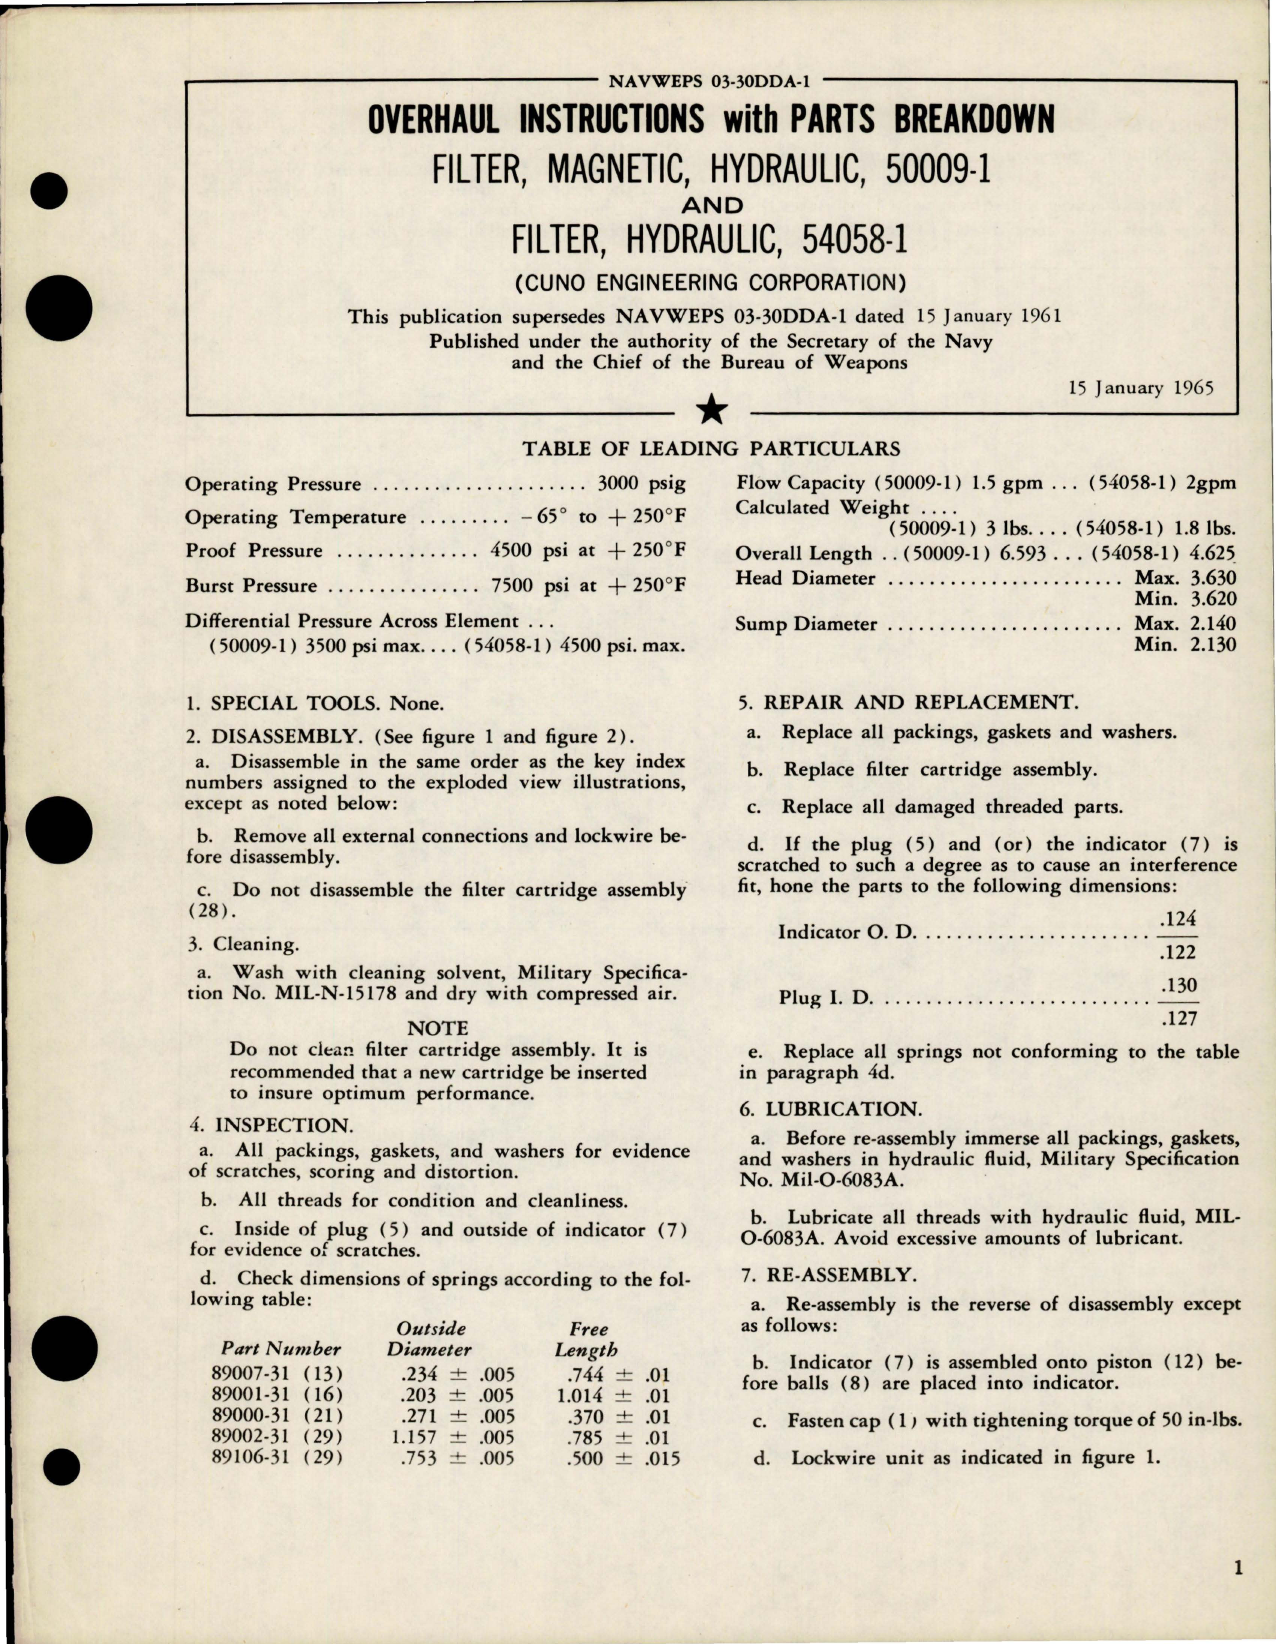 Sample page 1 from AirCorps Library document: Overhaul Instructions with Parts for Hydraulic Magnetic Filter 50009-1 and Hydraulic Filter 54058-1 